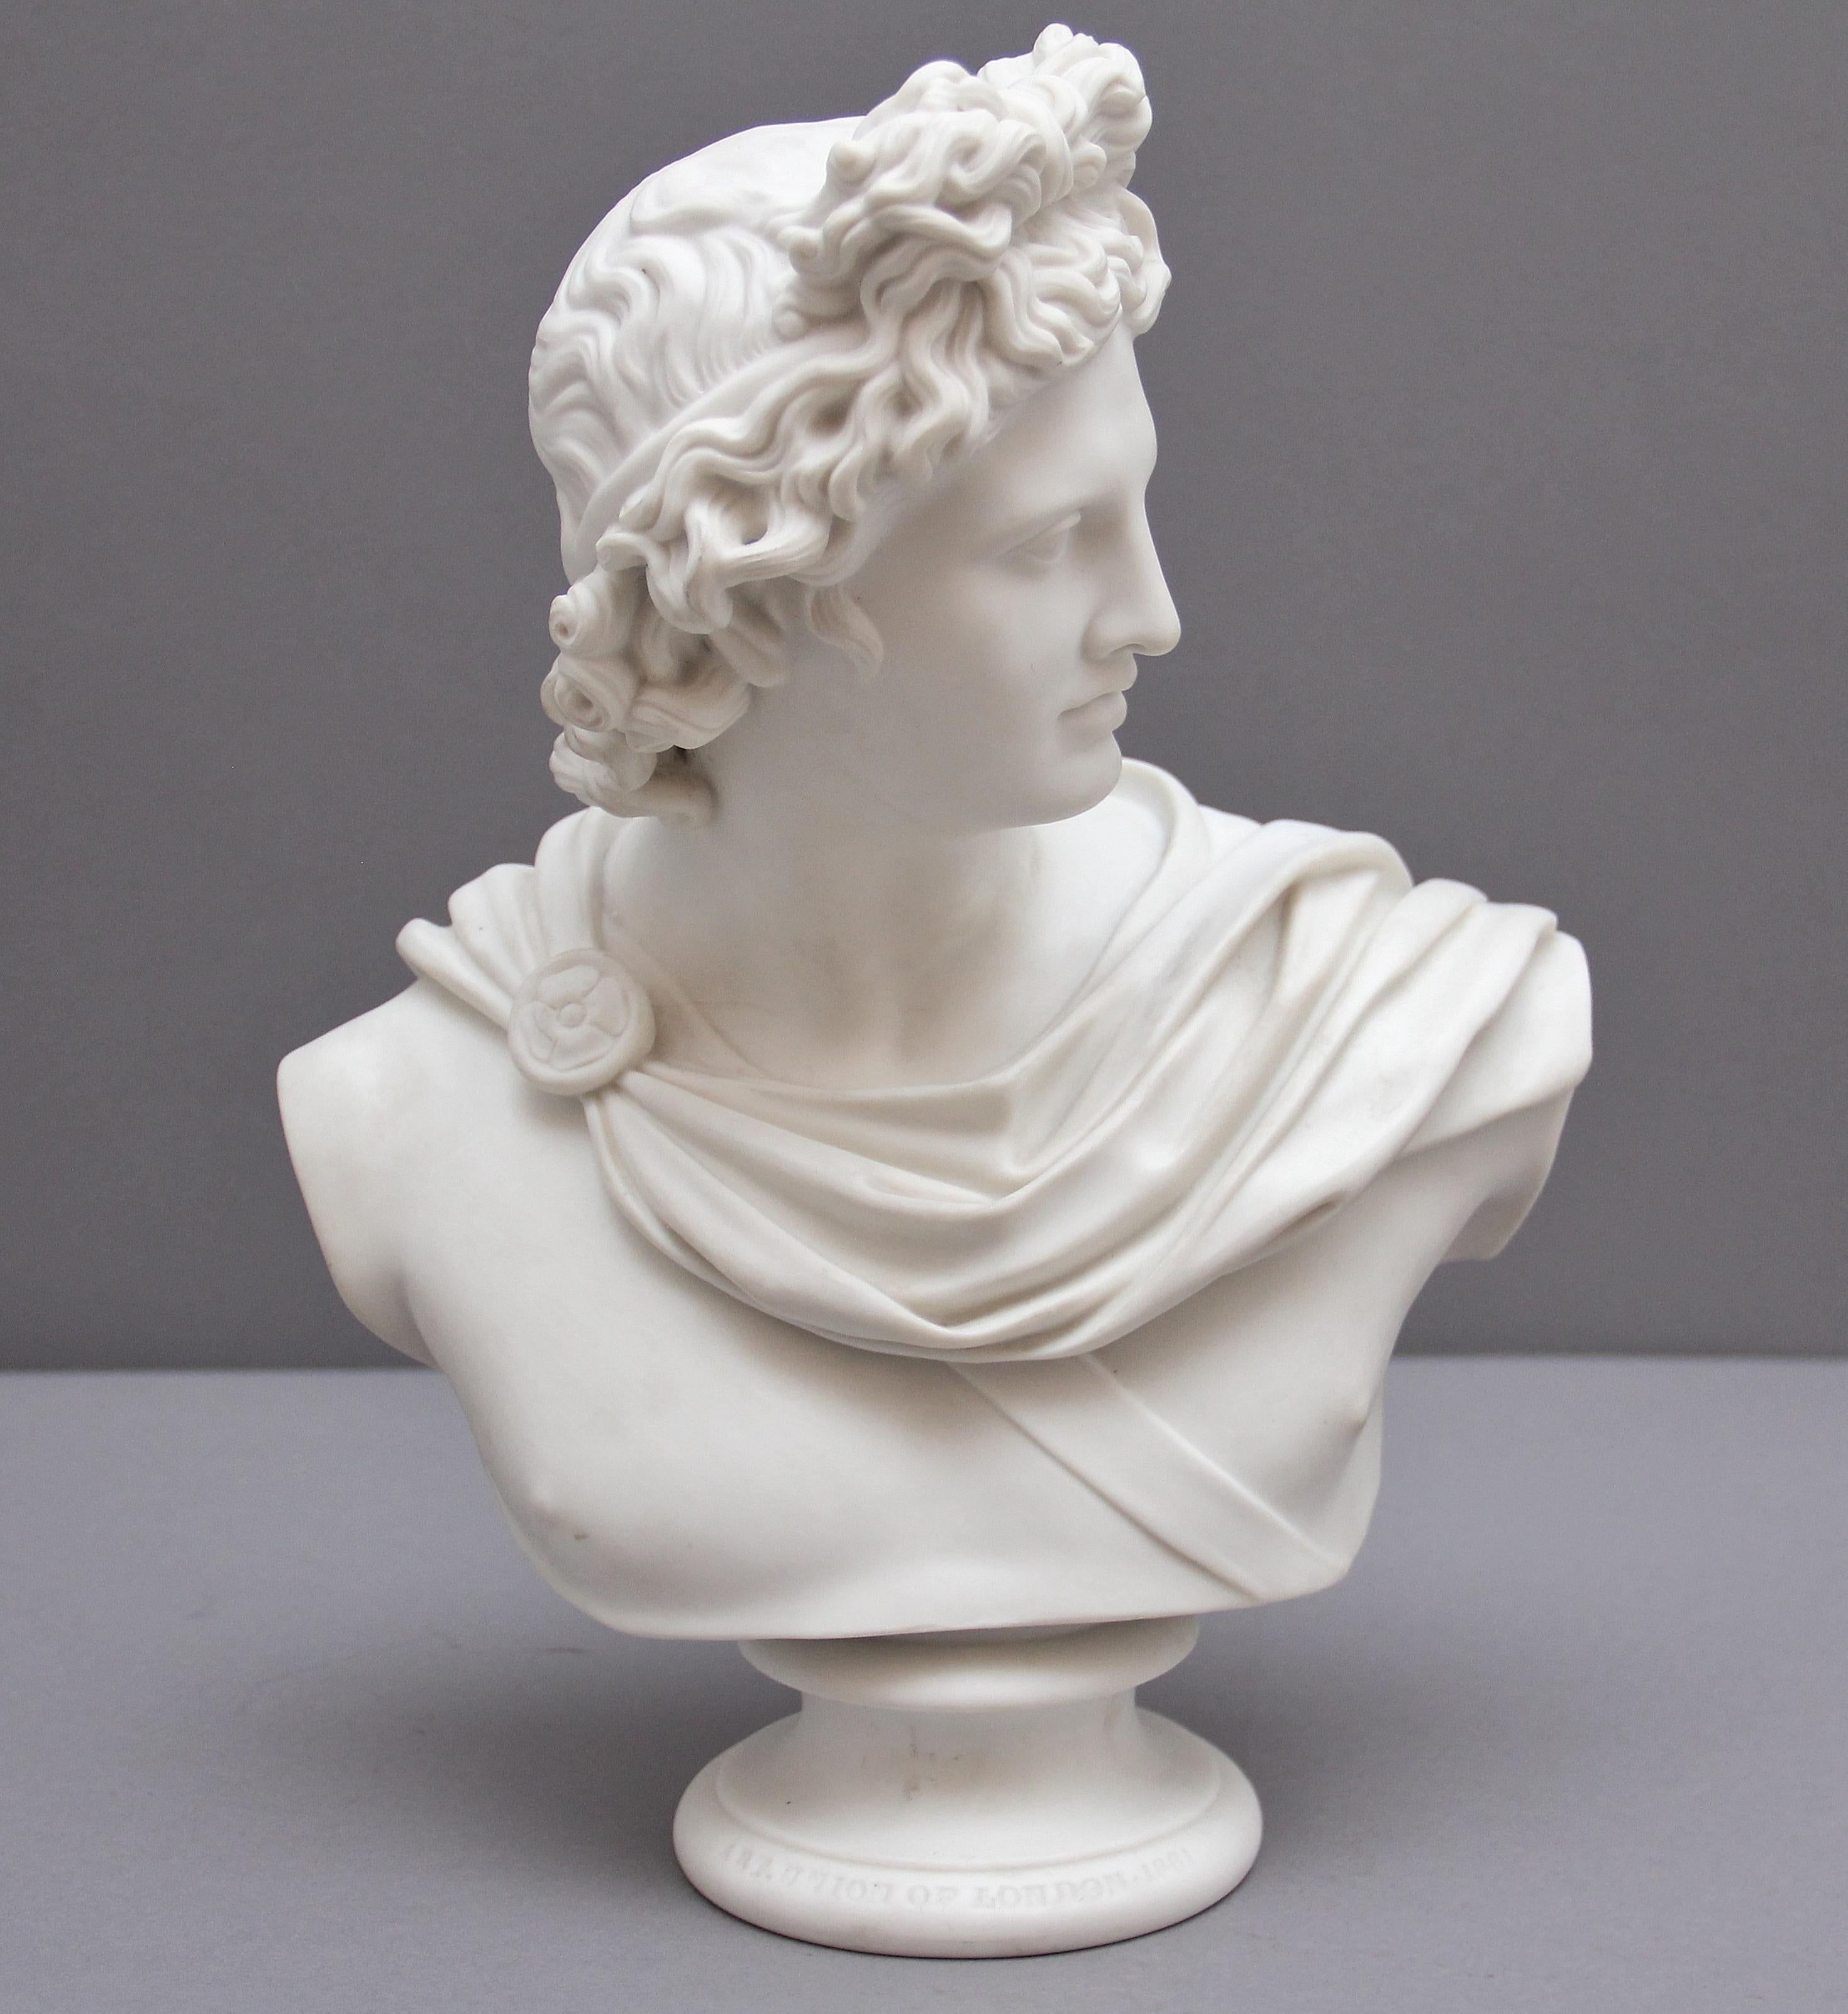 19th Century Art Union of London parian bust of Apollo modelled by C Delpech dated 1861, his head is looking to the right, draped across one shoulder fastened by a medallion, on socle base.
 